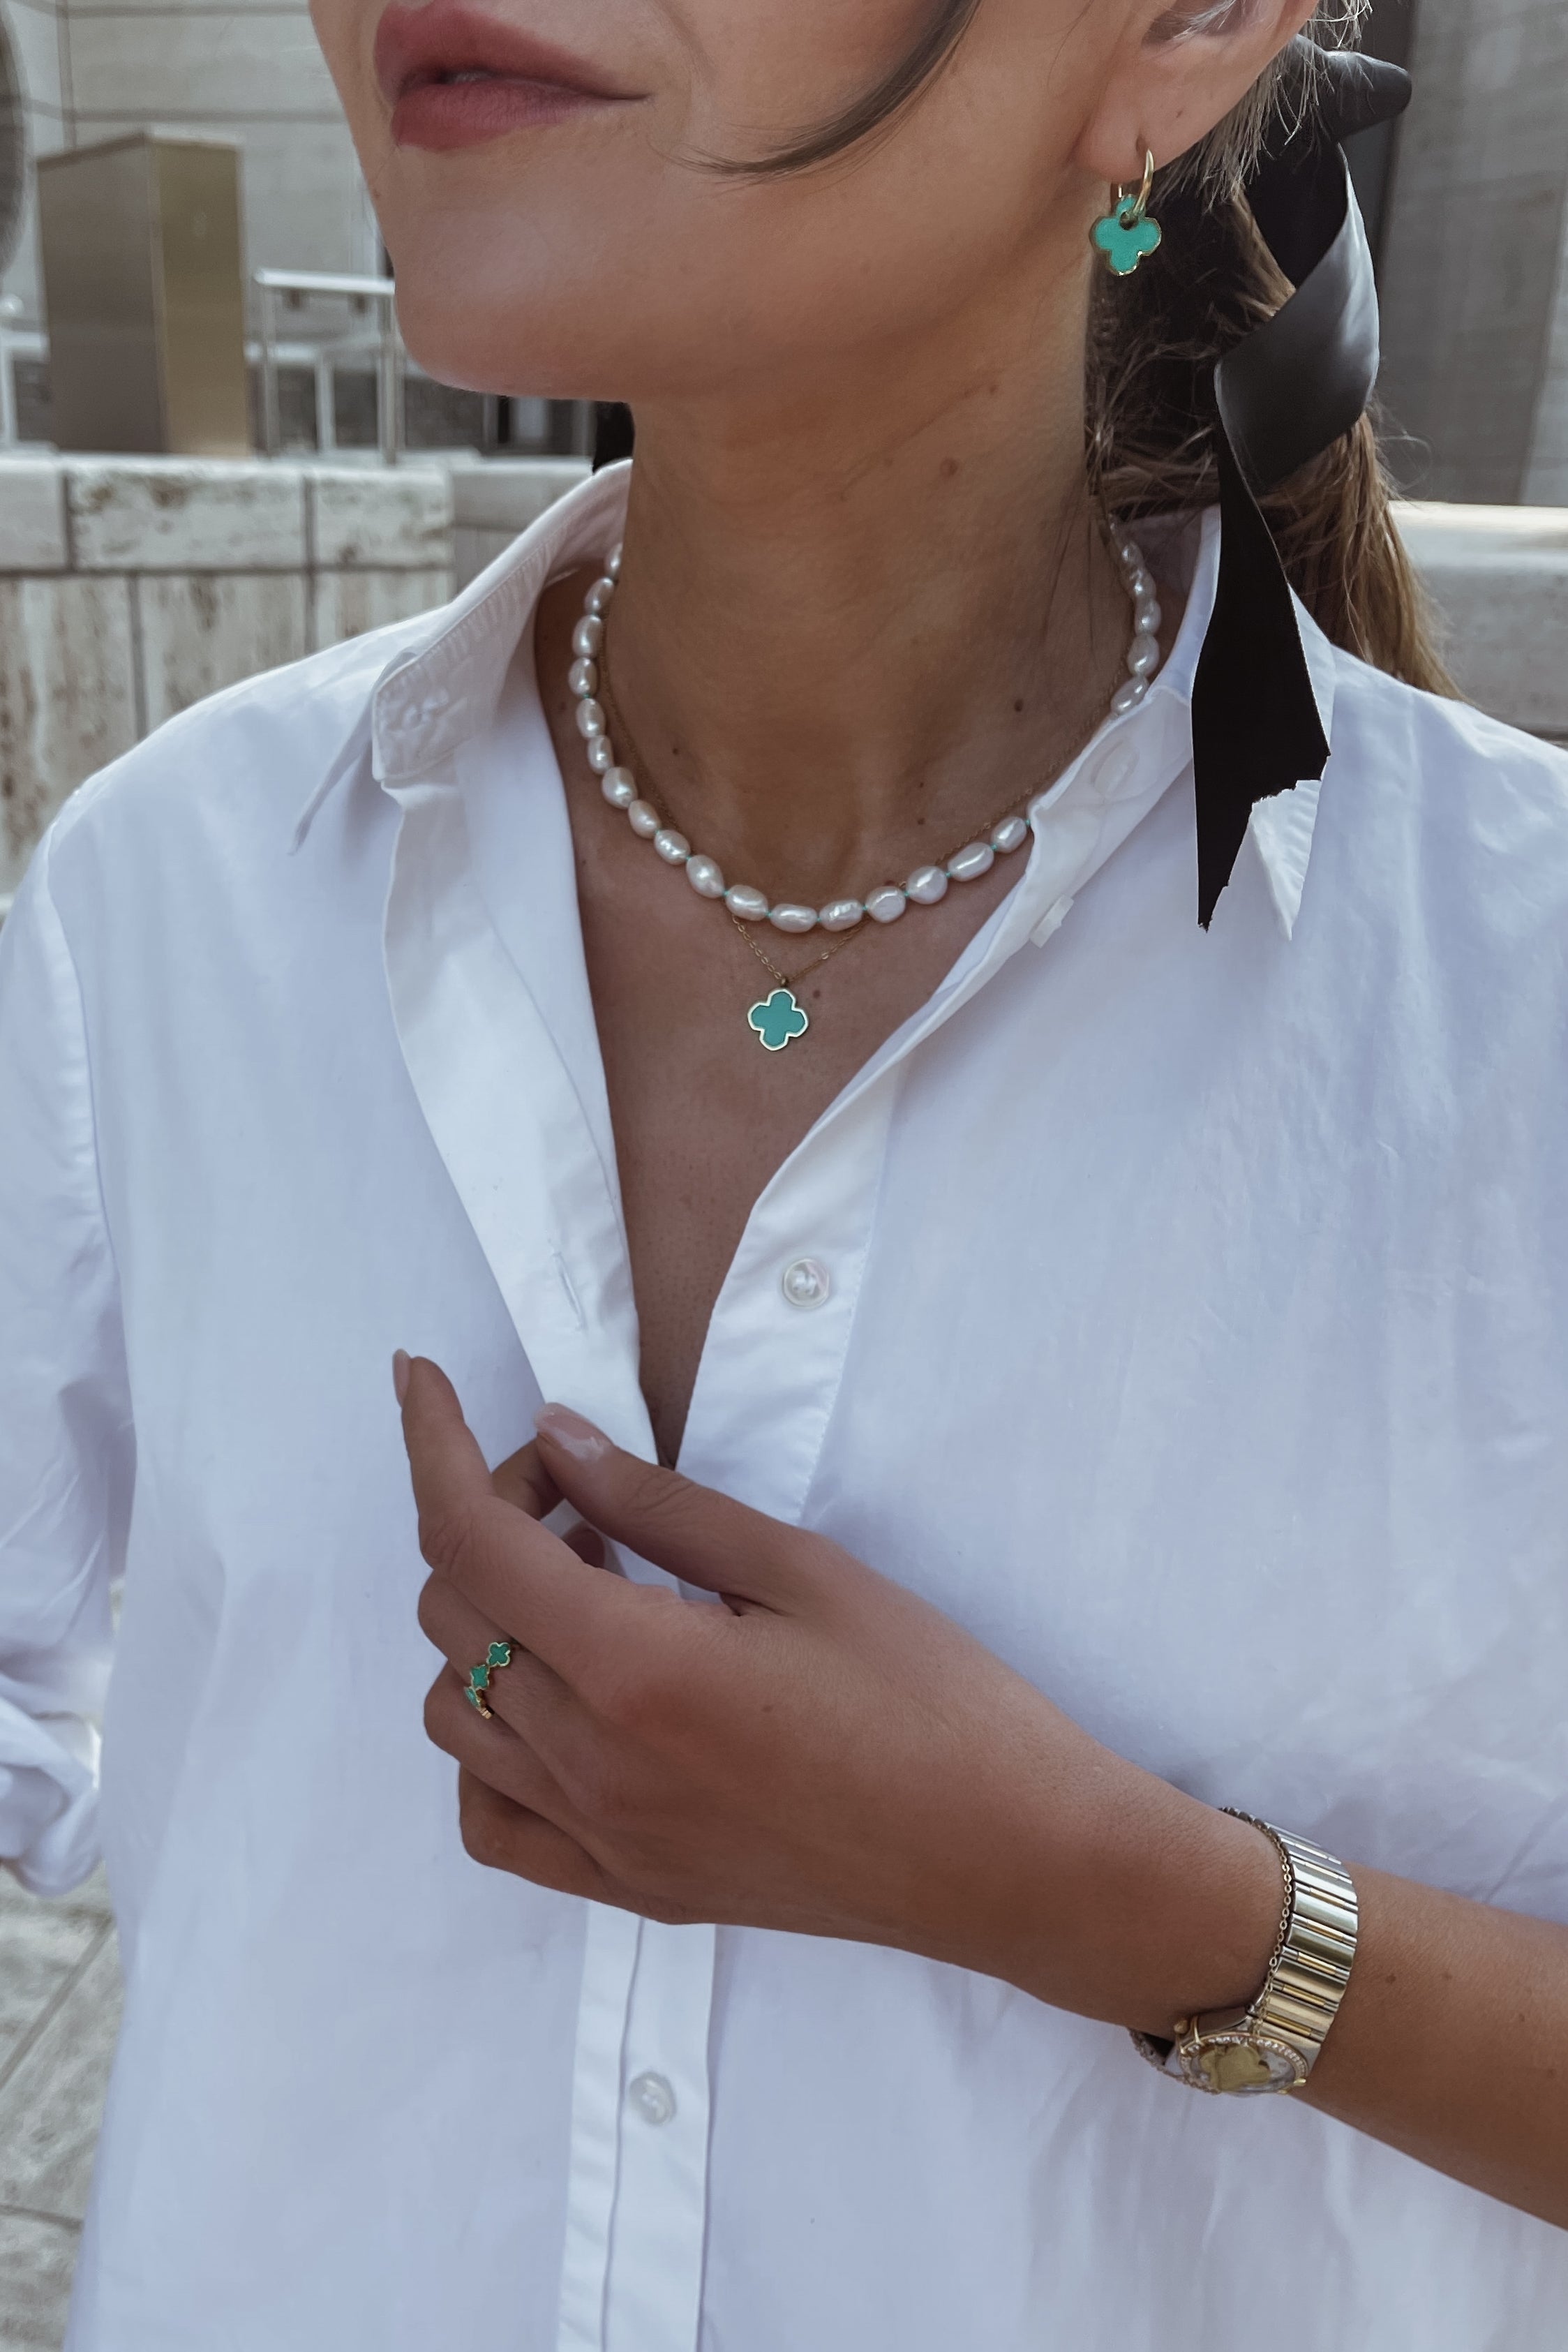 Whitney Necklace - Boutique Minimaliste has waterproof, durable, elegant and vintage inspired jewelry